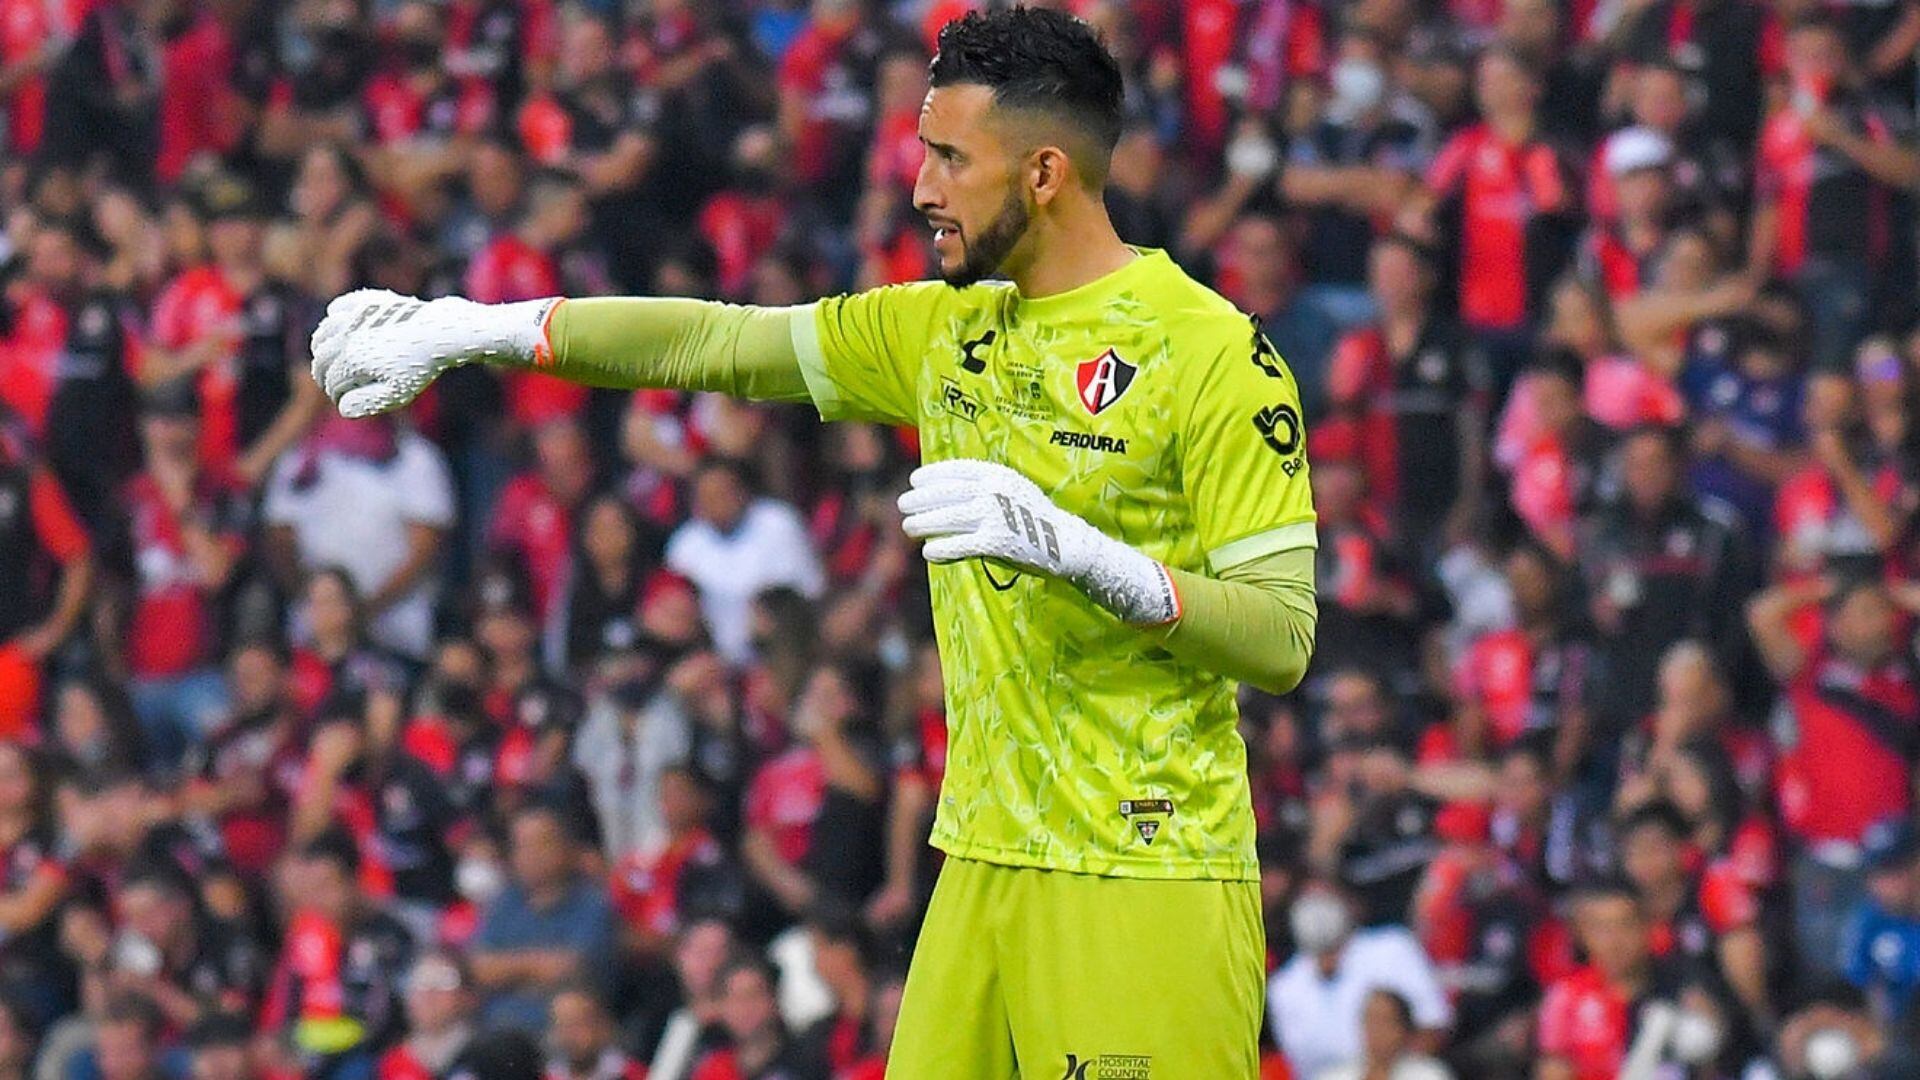 Camilo Vargas renewed with Atlas just to be sold to another Liga MX team